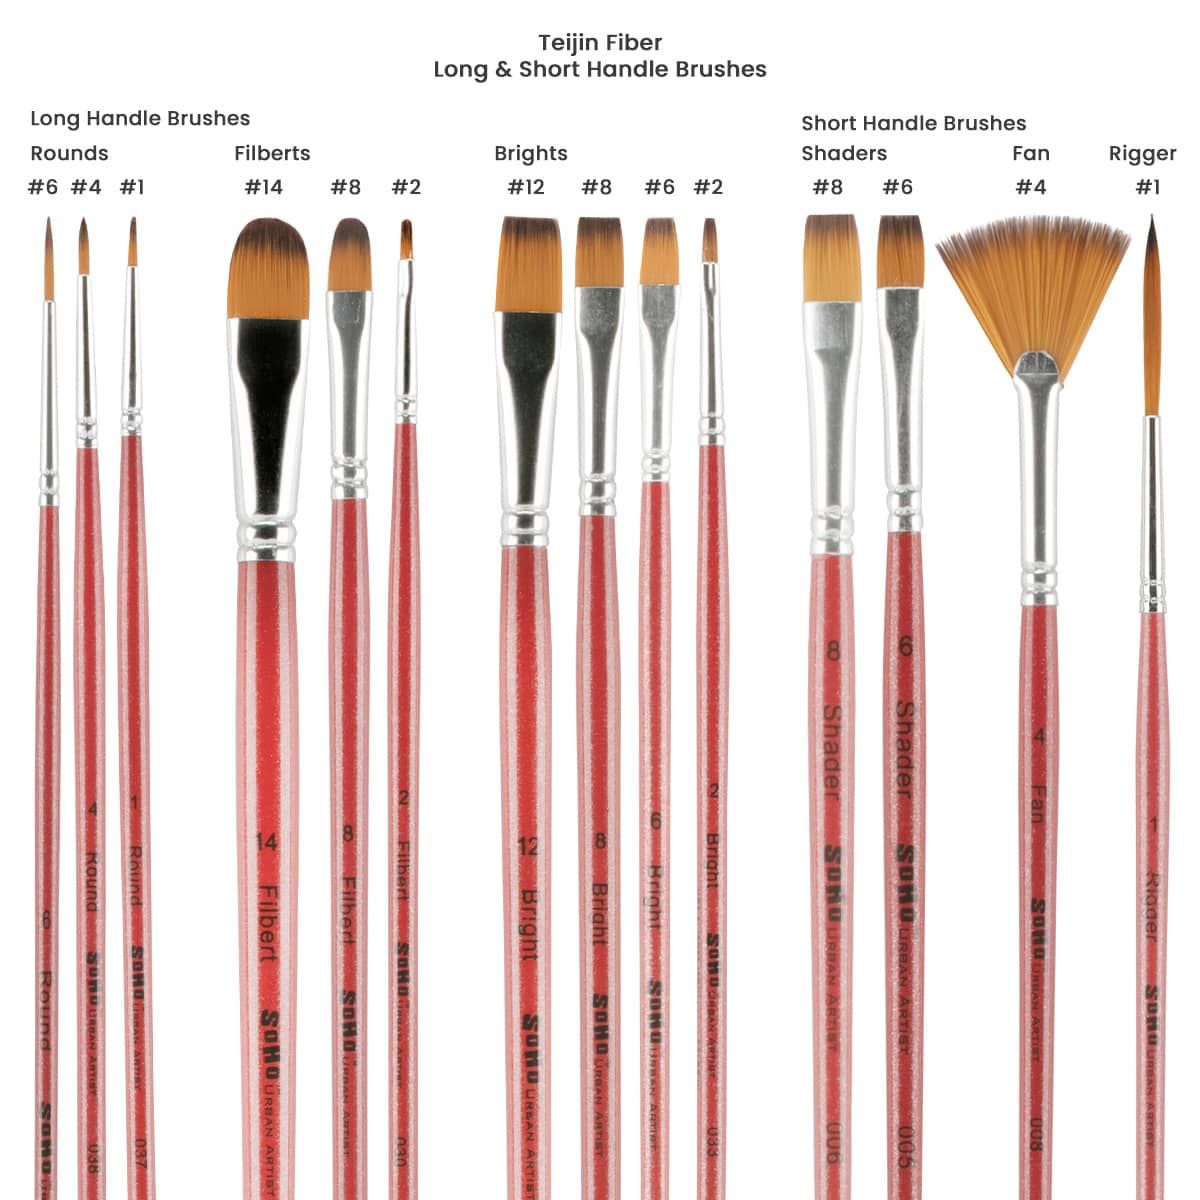 Variety of styles and sizes to outfit any painter's basic brush needs